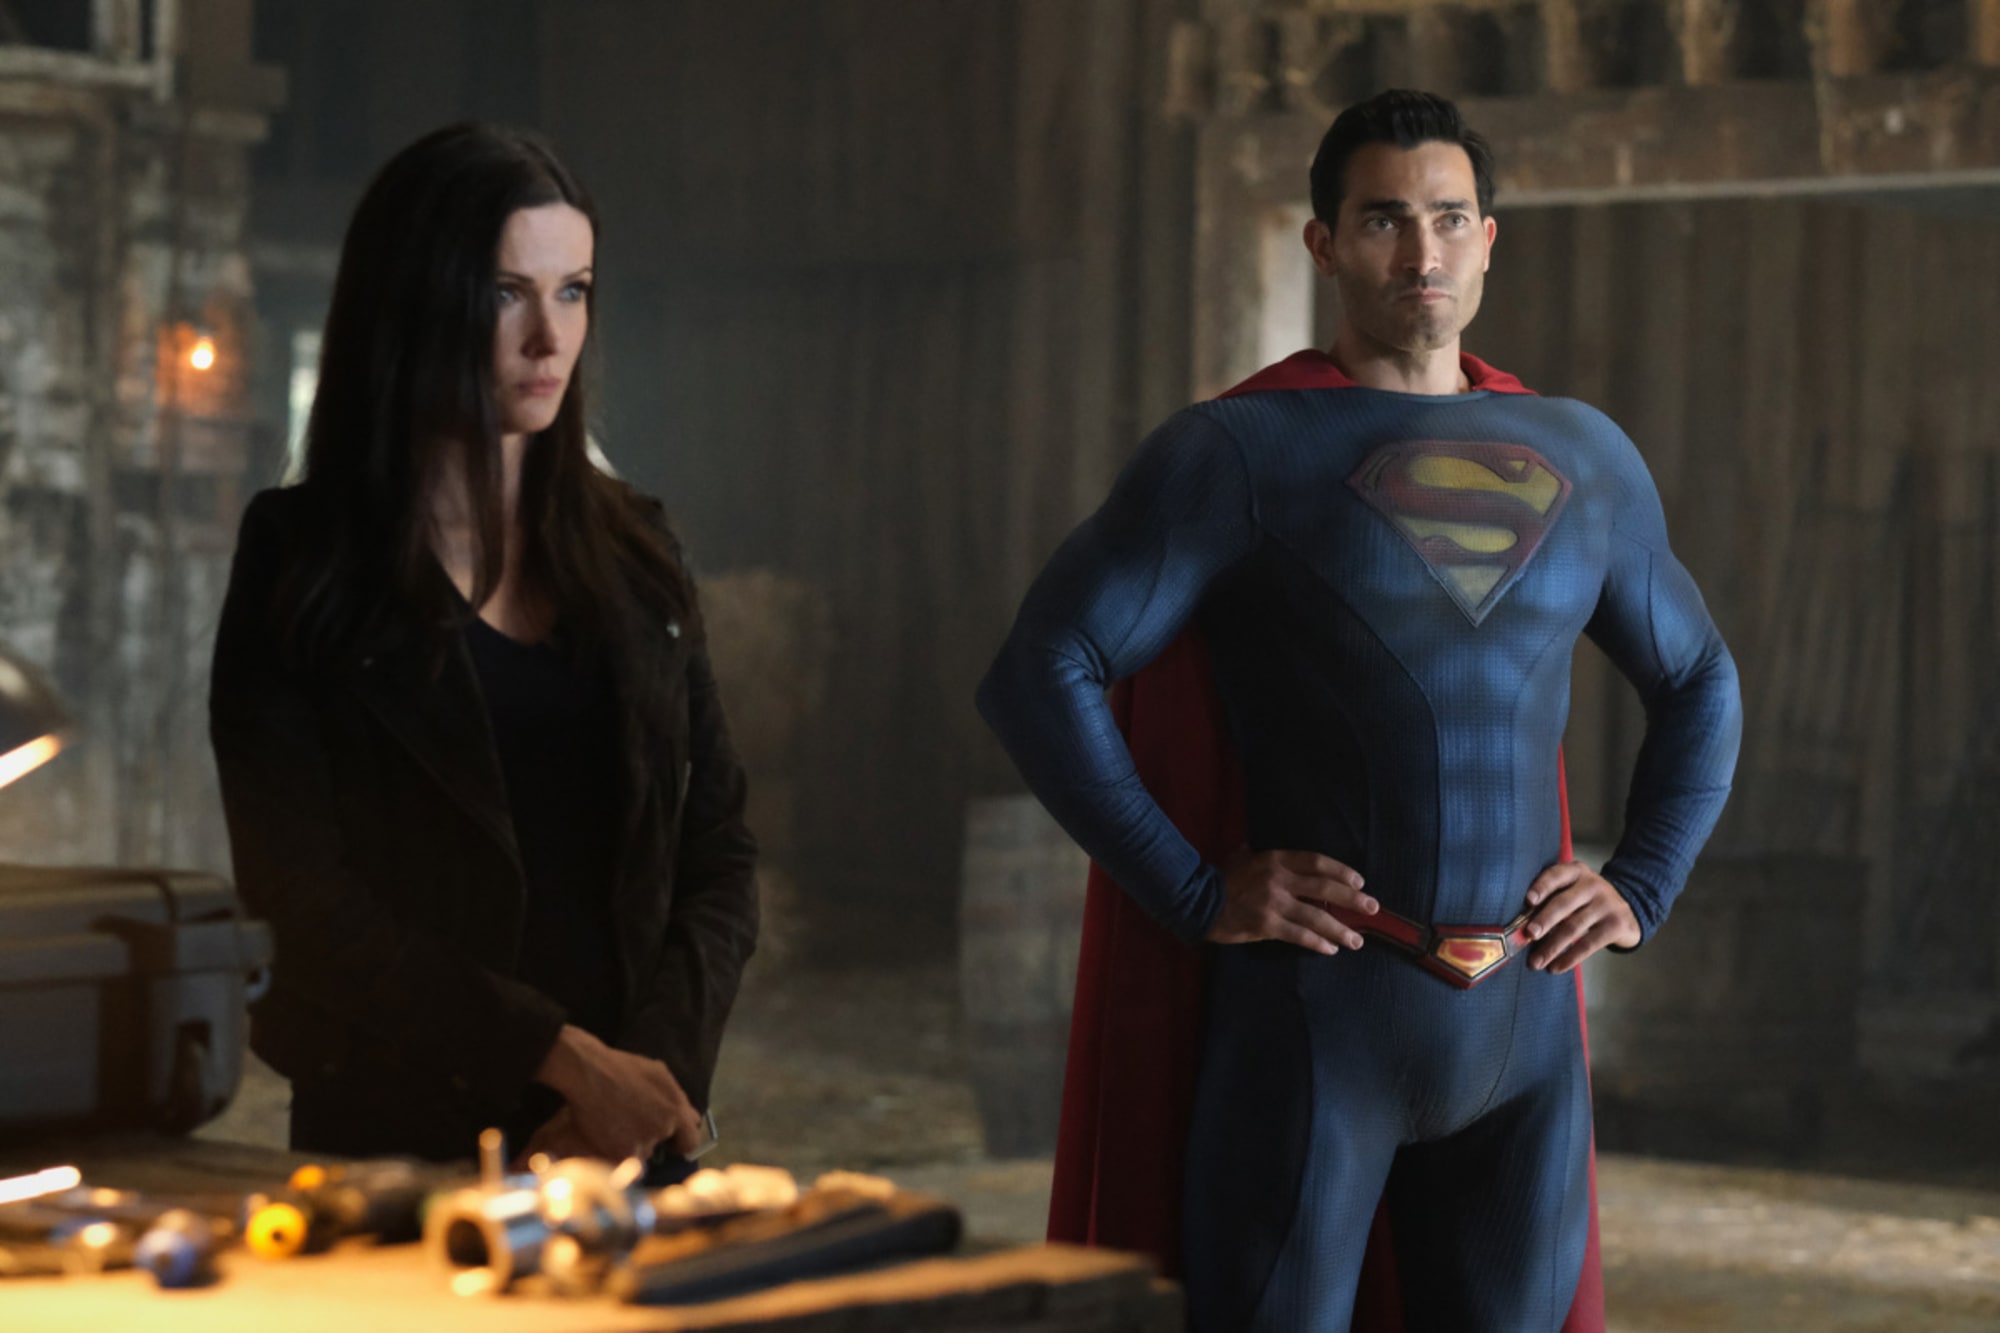 Superman and Lois Season 4 Release Date Revealed